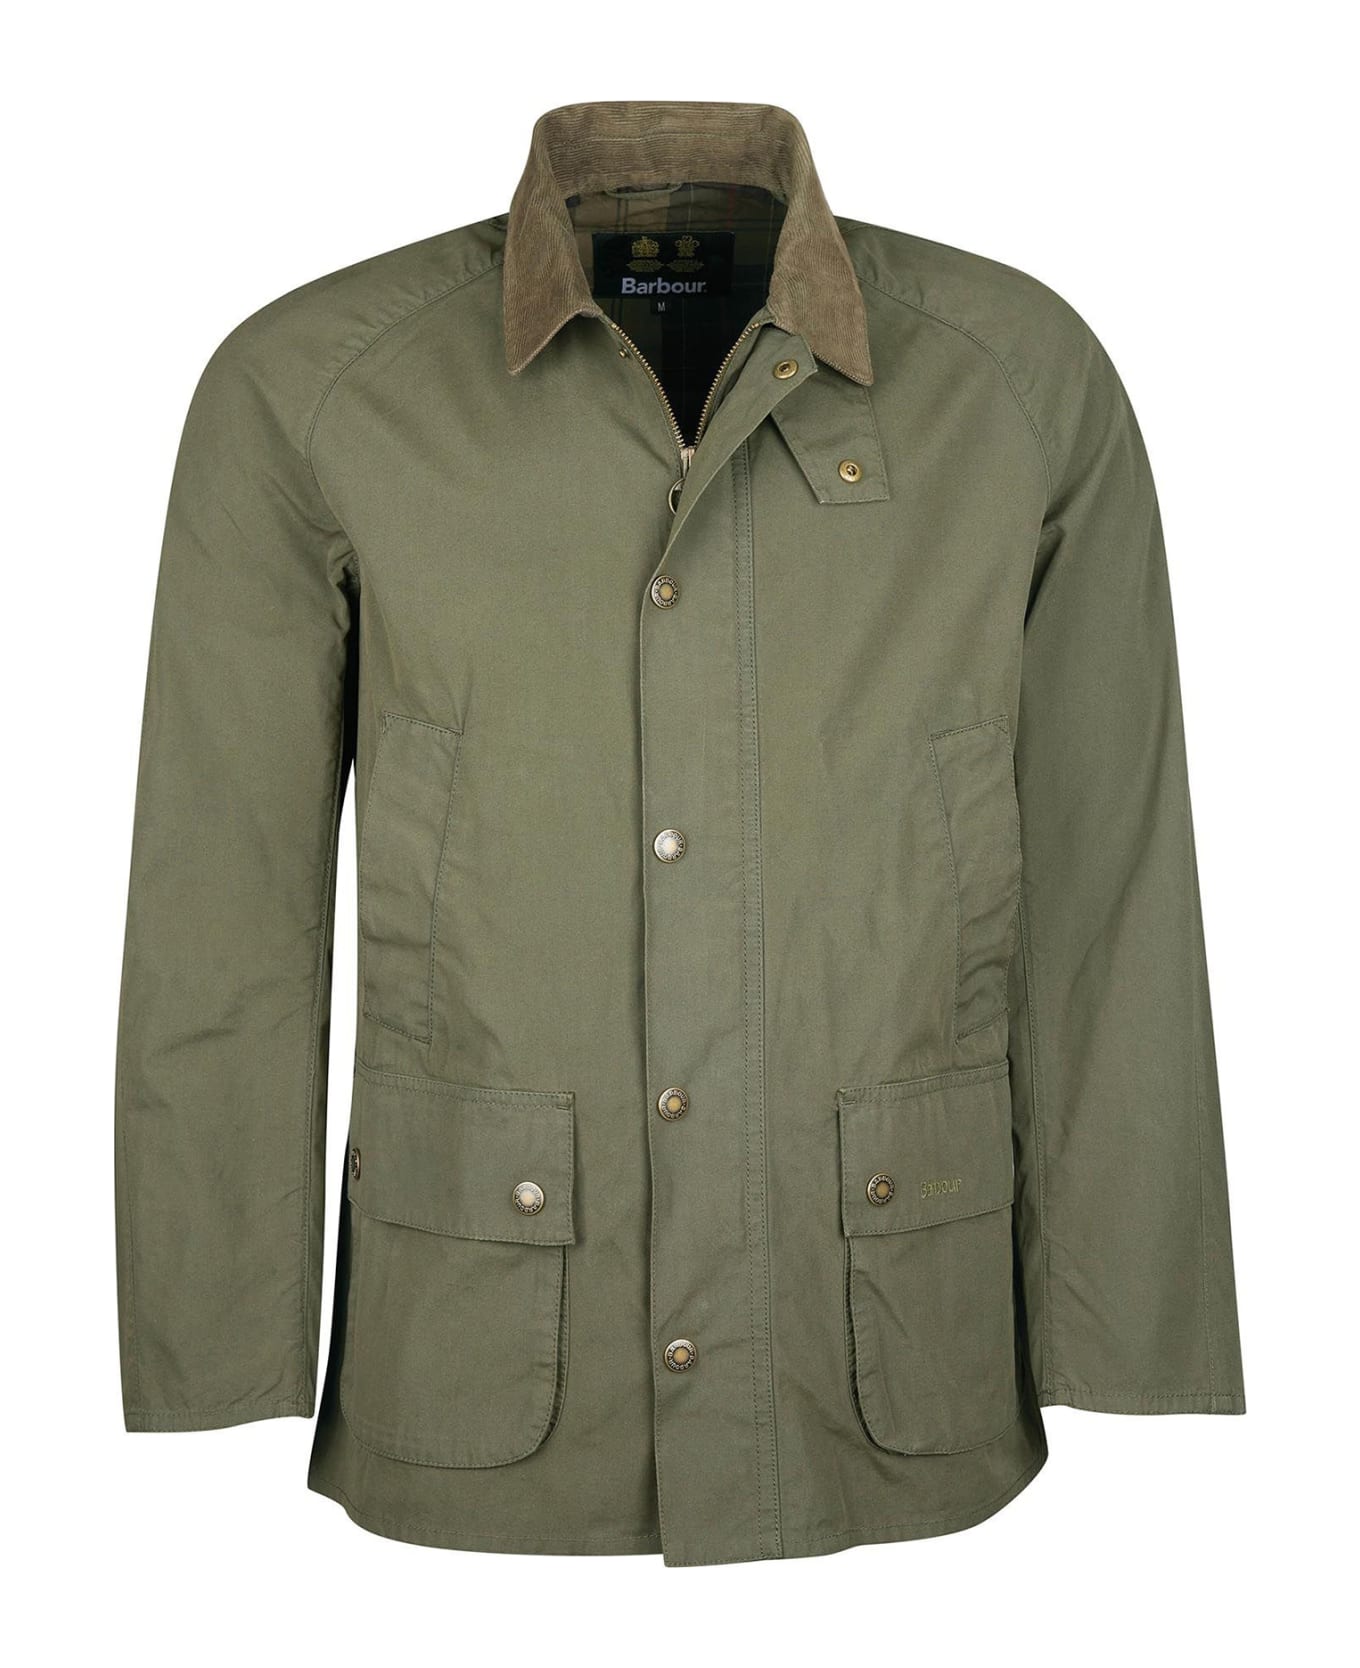 Barbour Olive Green Jacket With Buttons - OLIVE